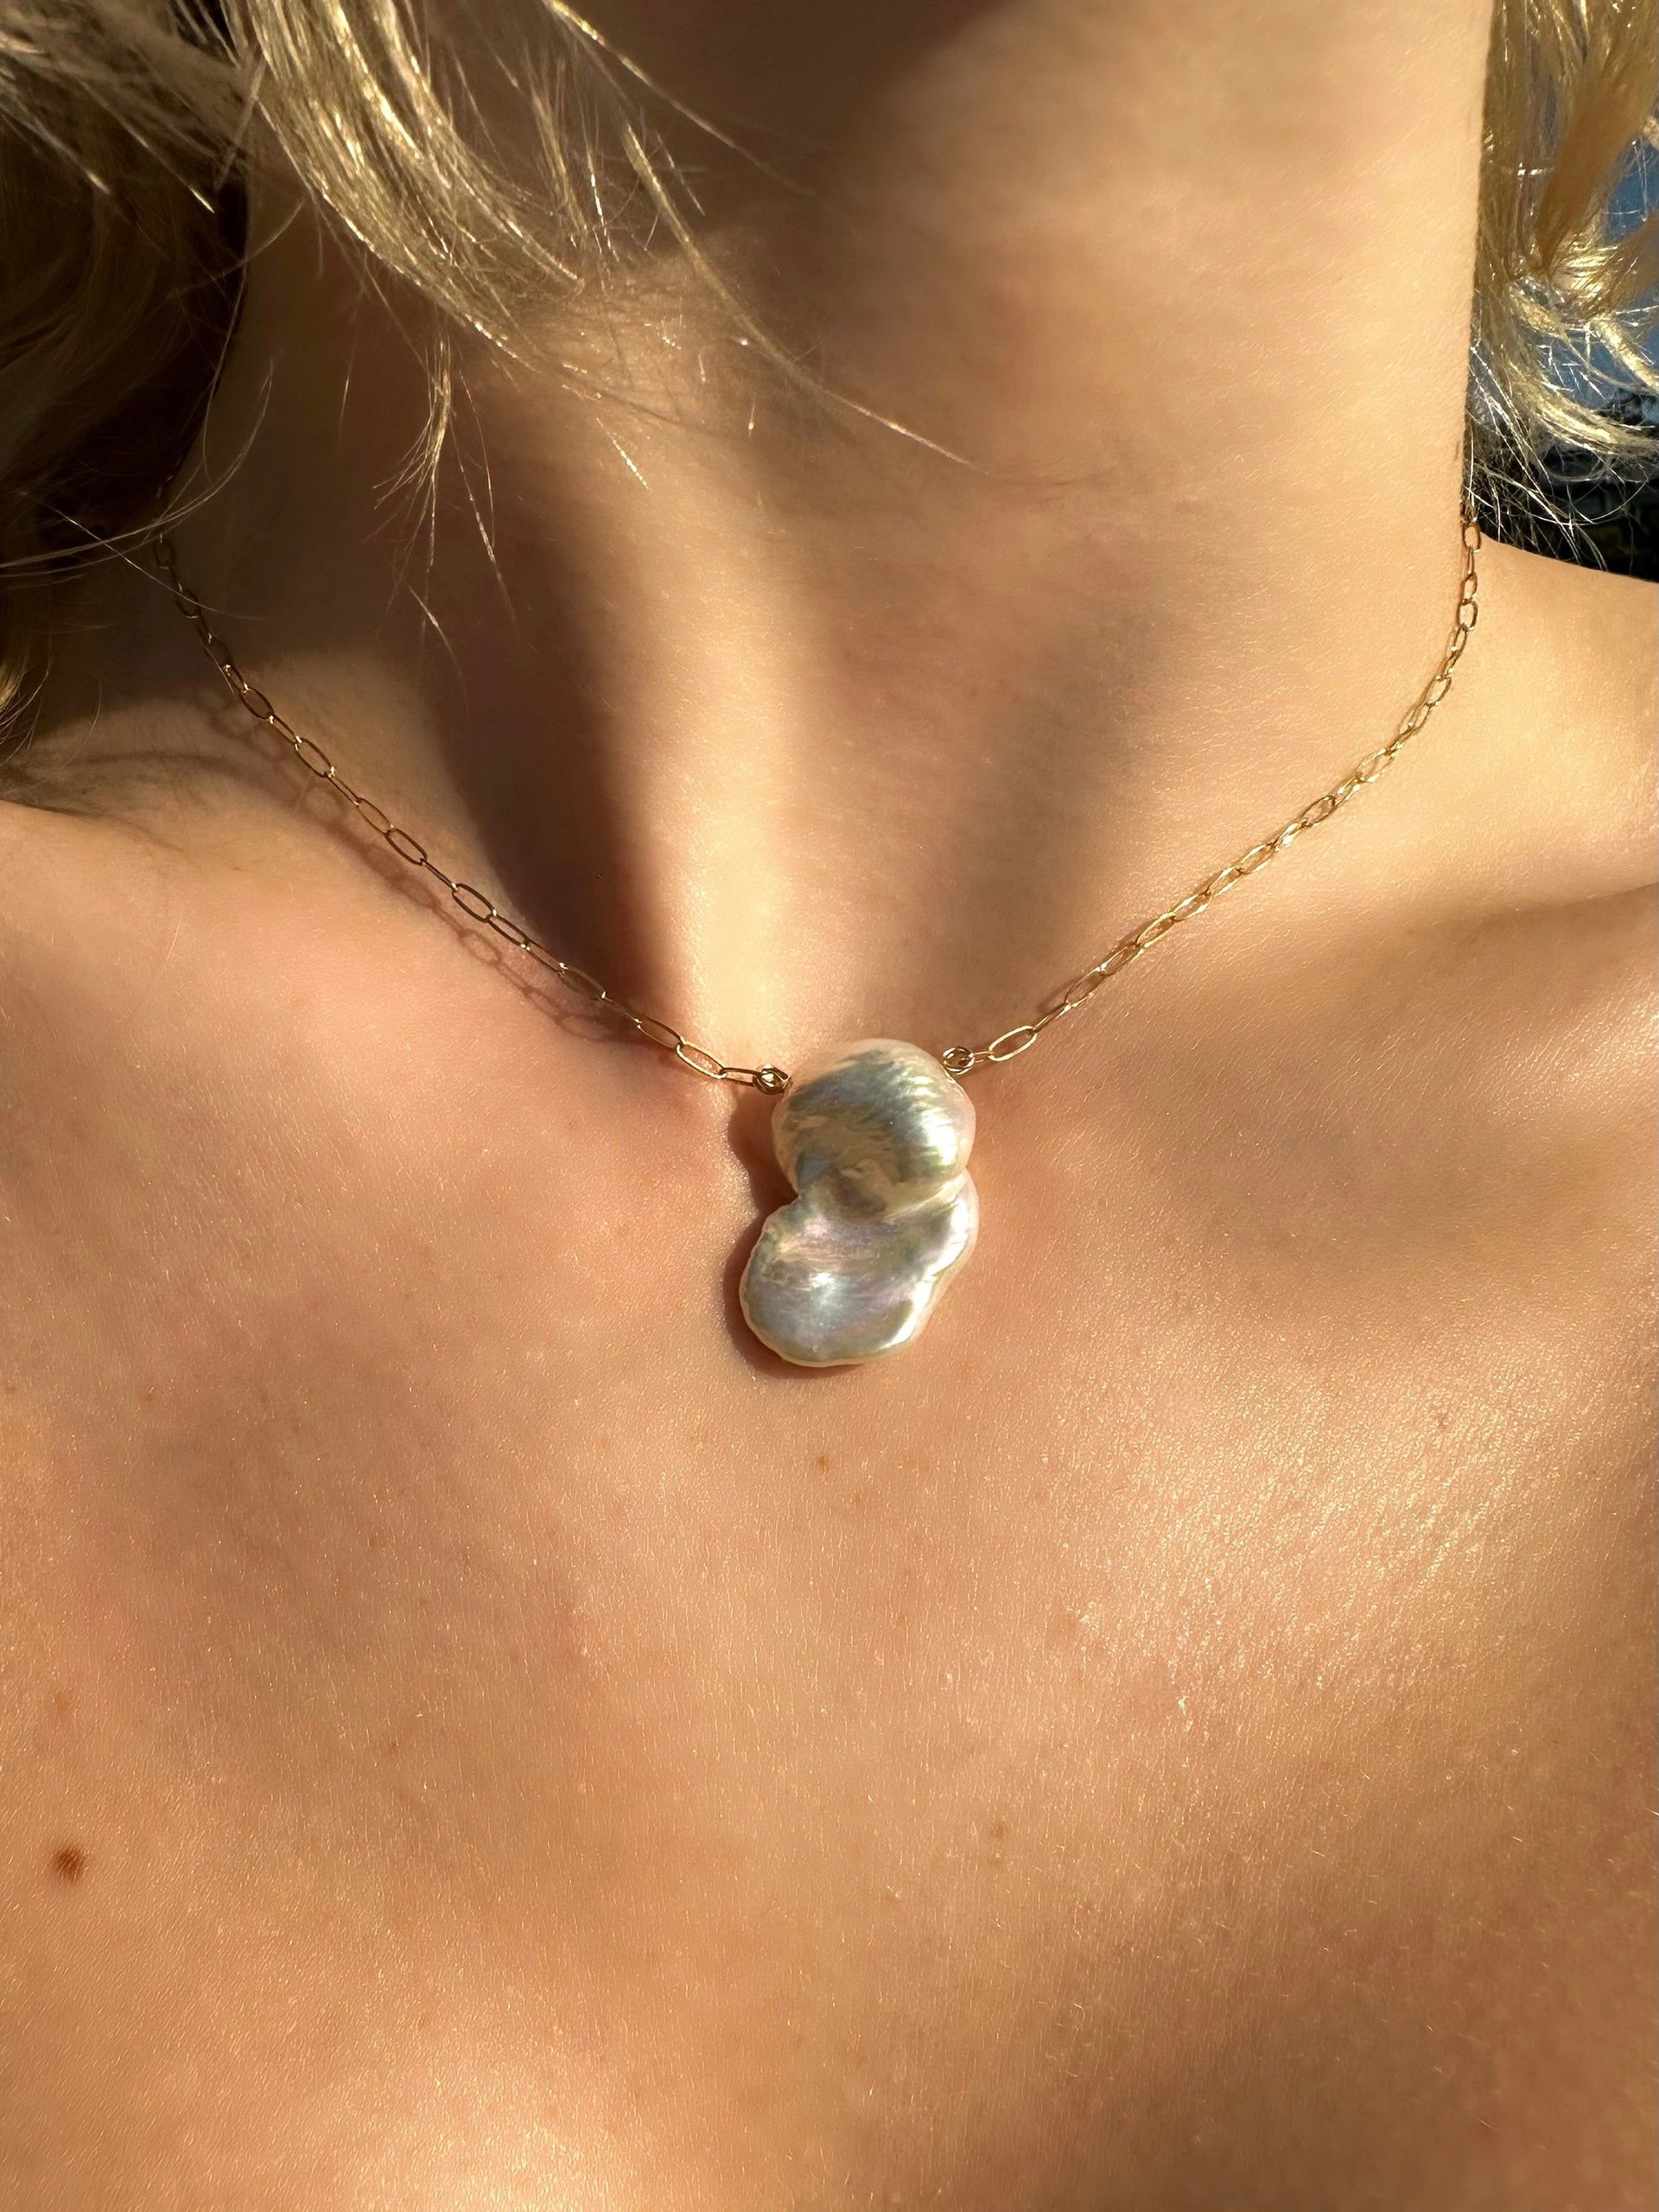 Thalassa baroque pearl necklace, baroque pearl necklace, full-view on model